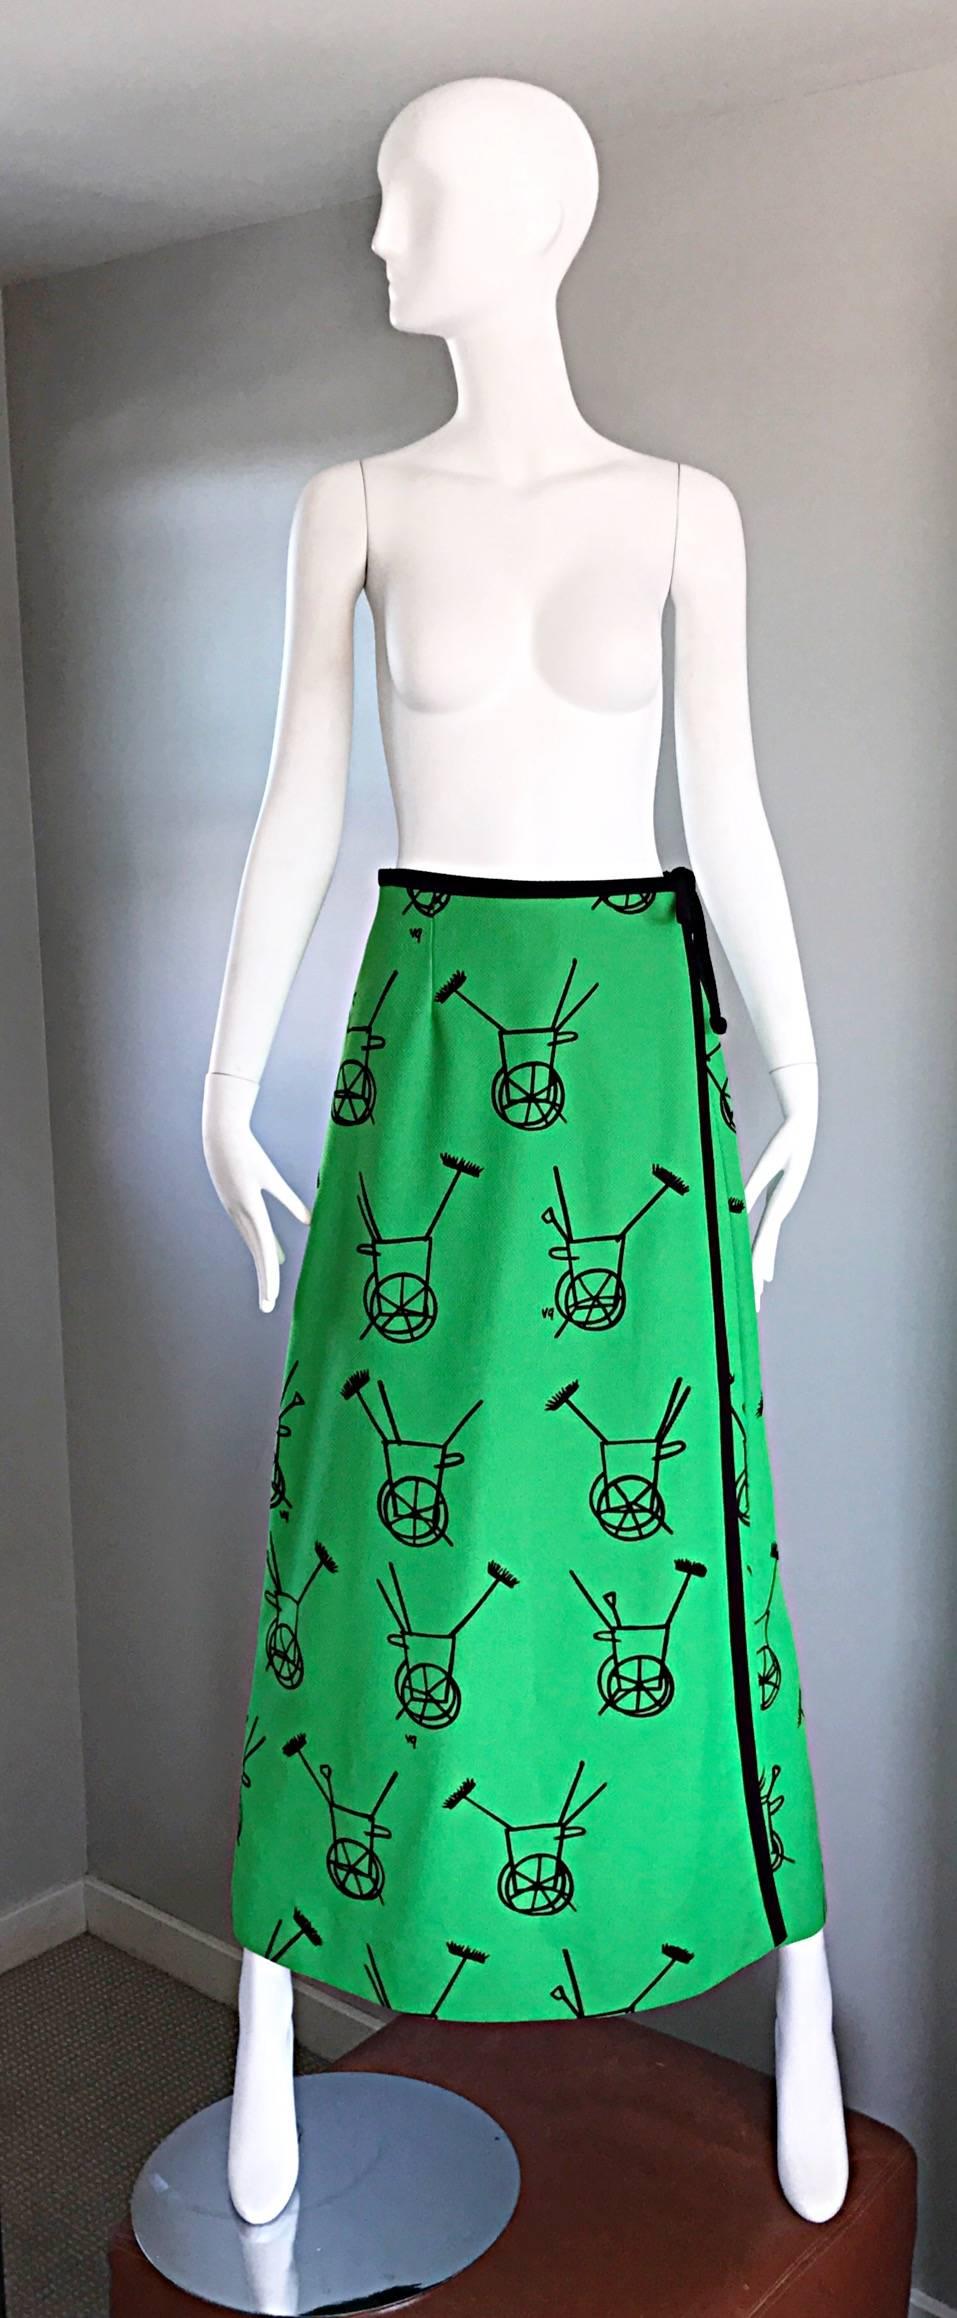 Amazing early 70s VESTED GENTRESS 'wheelbarrow' novelty print Kelly green and black wrap maxi skirt! Features wheel barrow carts throughout, with brooms sticking out. Vibrant green color, with a flattering flared fit. Hidden interior hook-and-eye